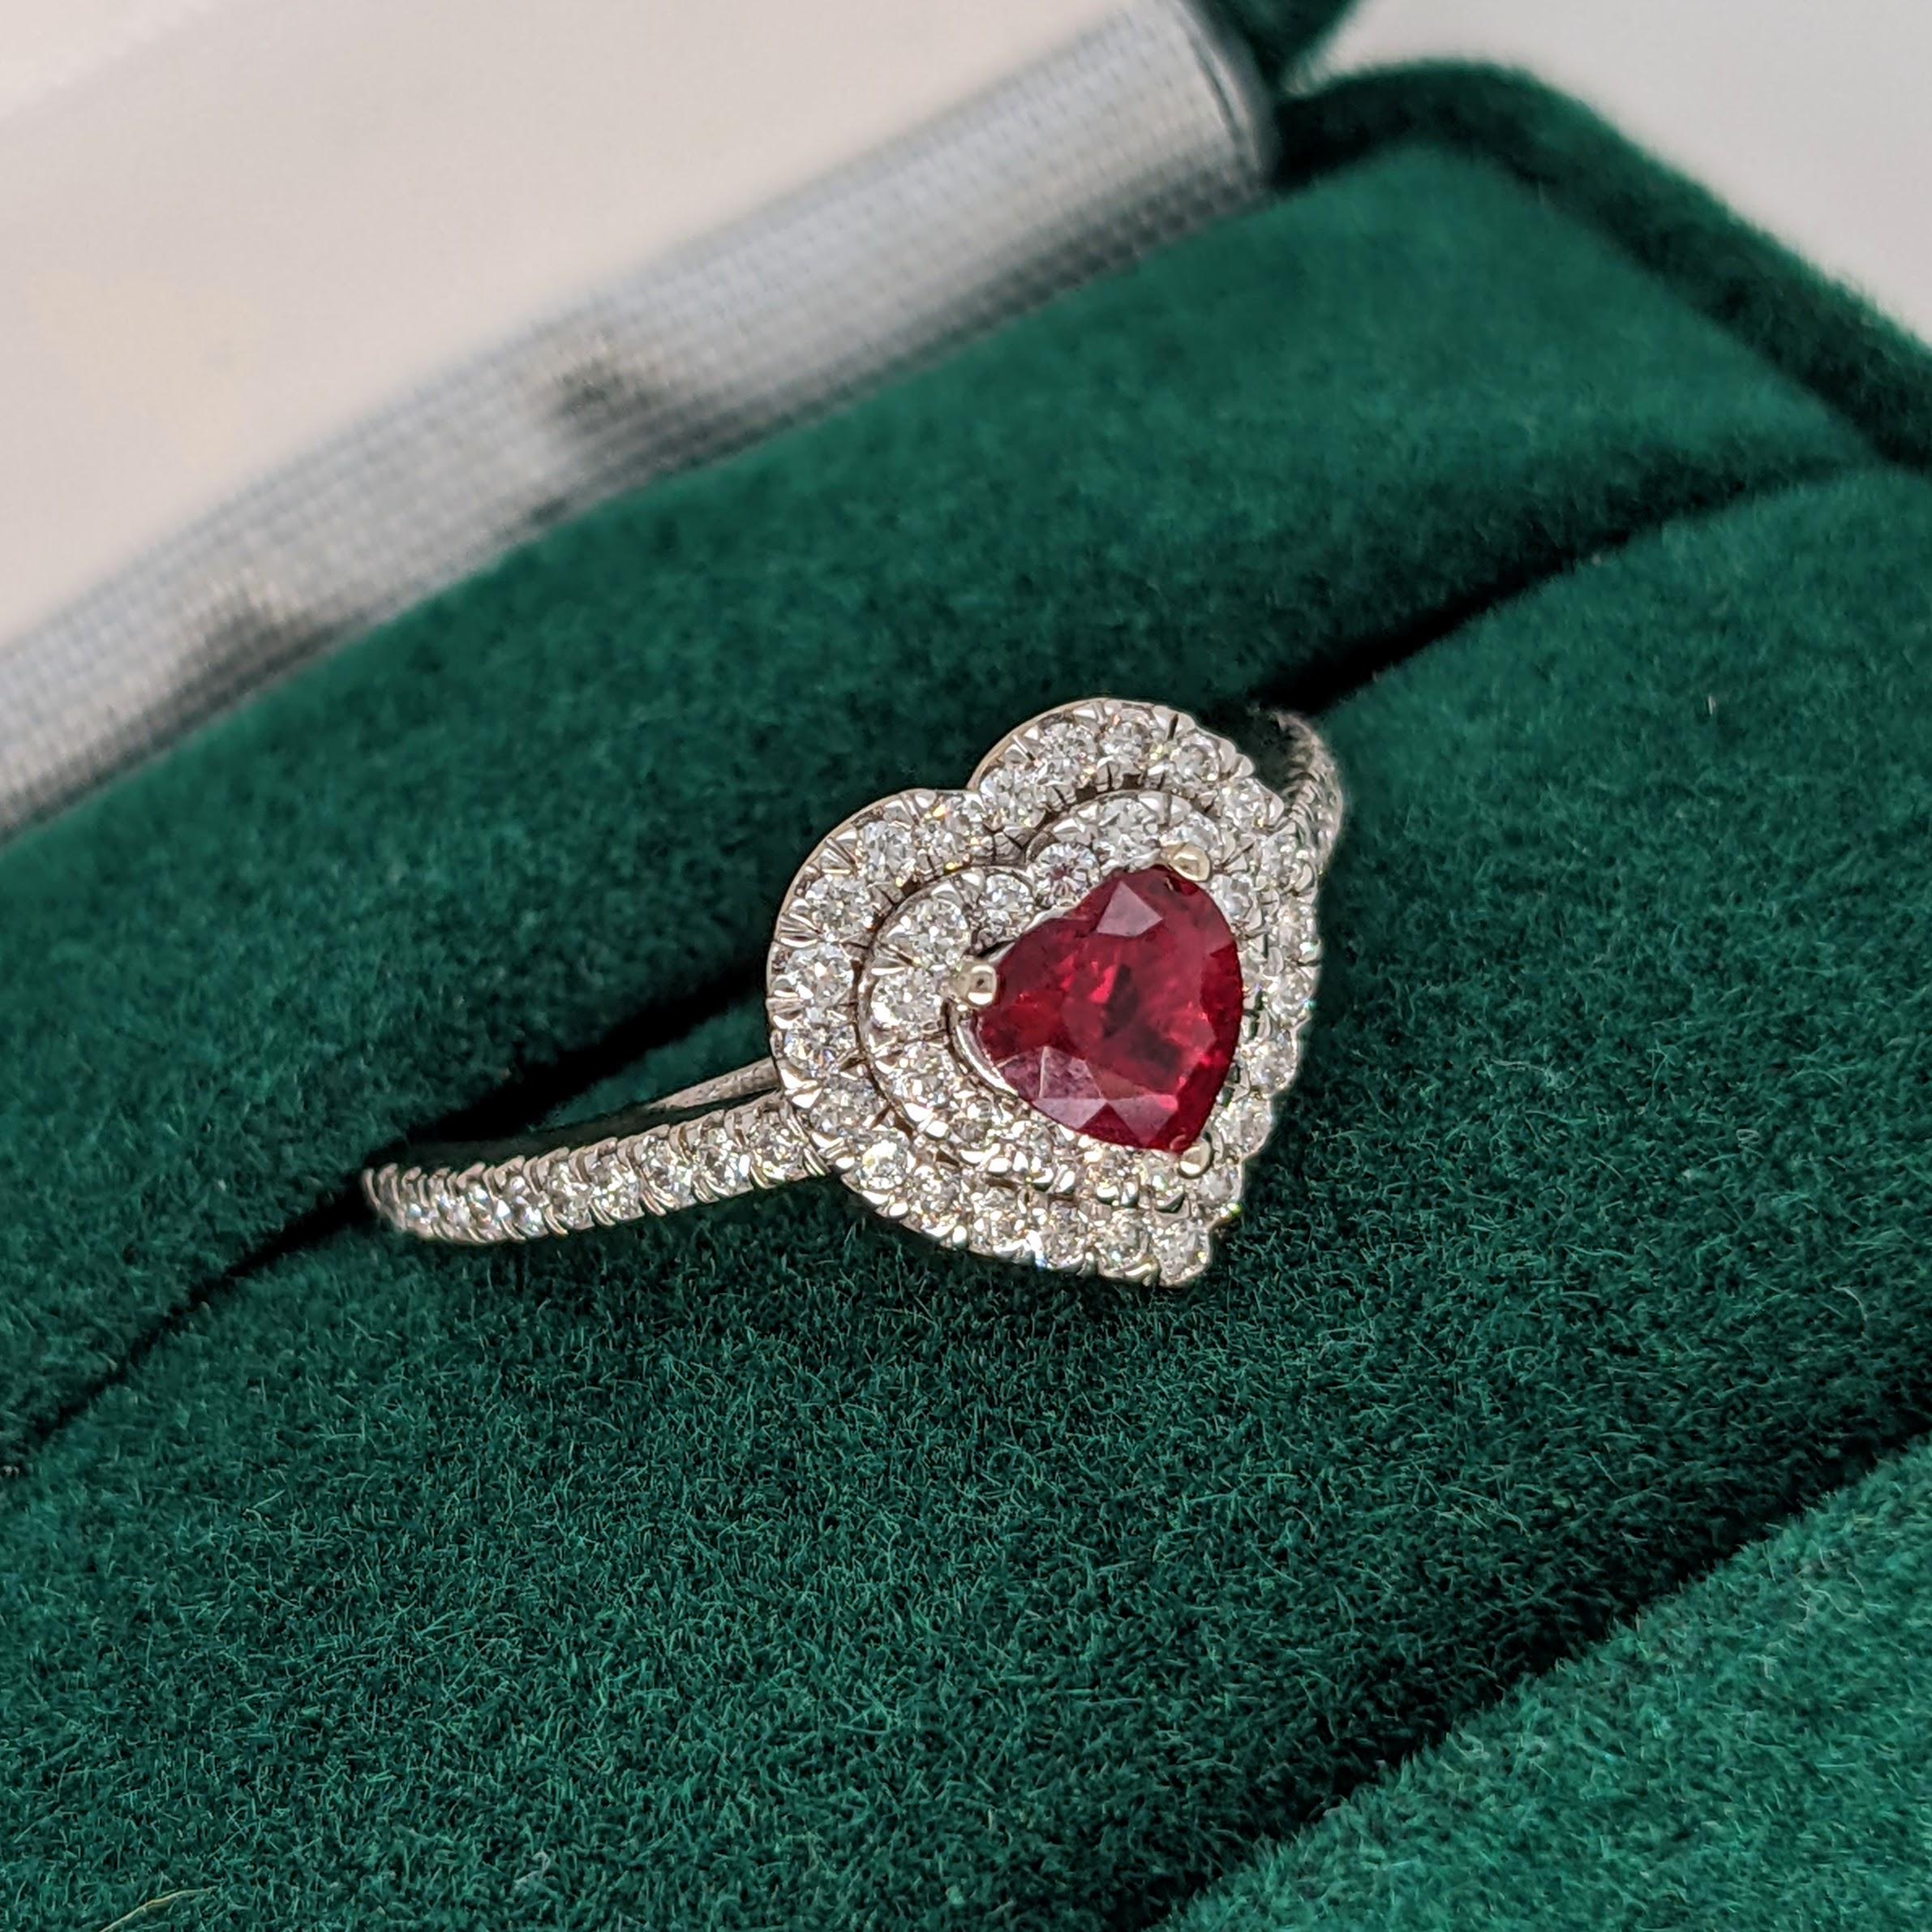 Women's or Men's Heart Shape 1.5ct Red Burma Ruby in 14K White Gold W Natural Diamond Double Halo